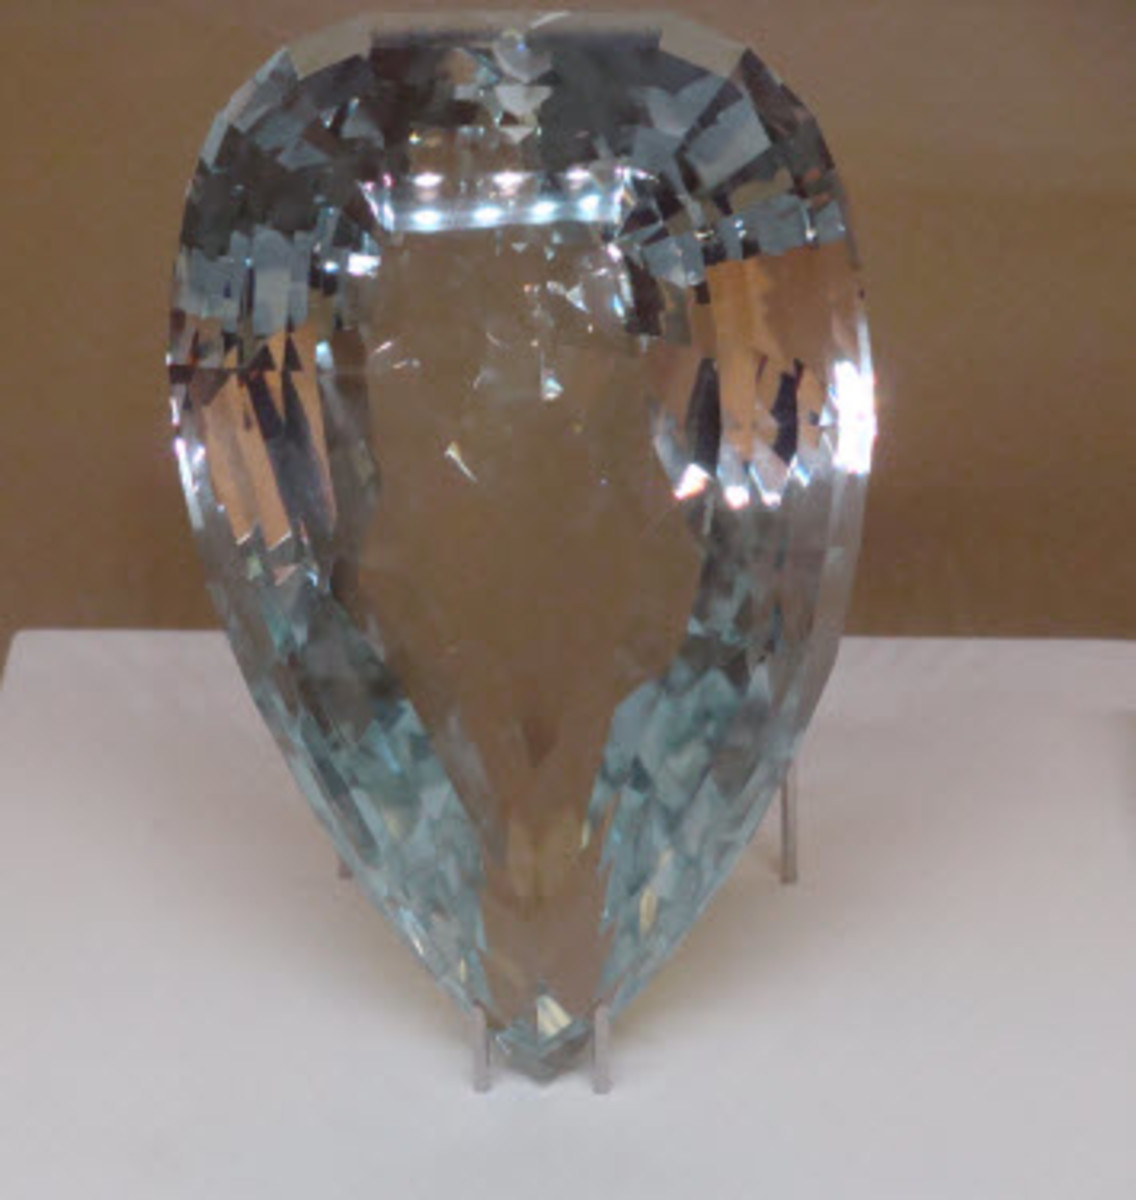 Not everything that looks like a diamond is actually a diamond. This is a picture of  the Chalmers Topaz which is 5,899 carats and weights over 21/2 pounds. Topazes are valuable but not as much as diamonds.